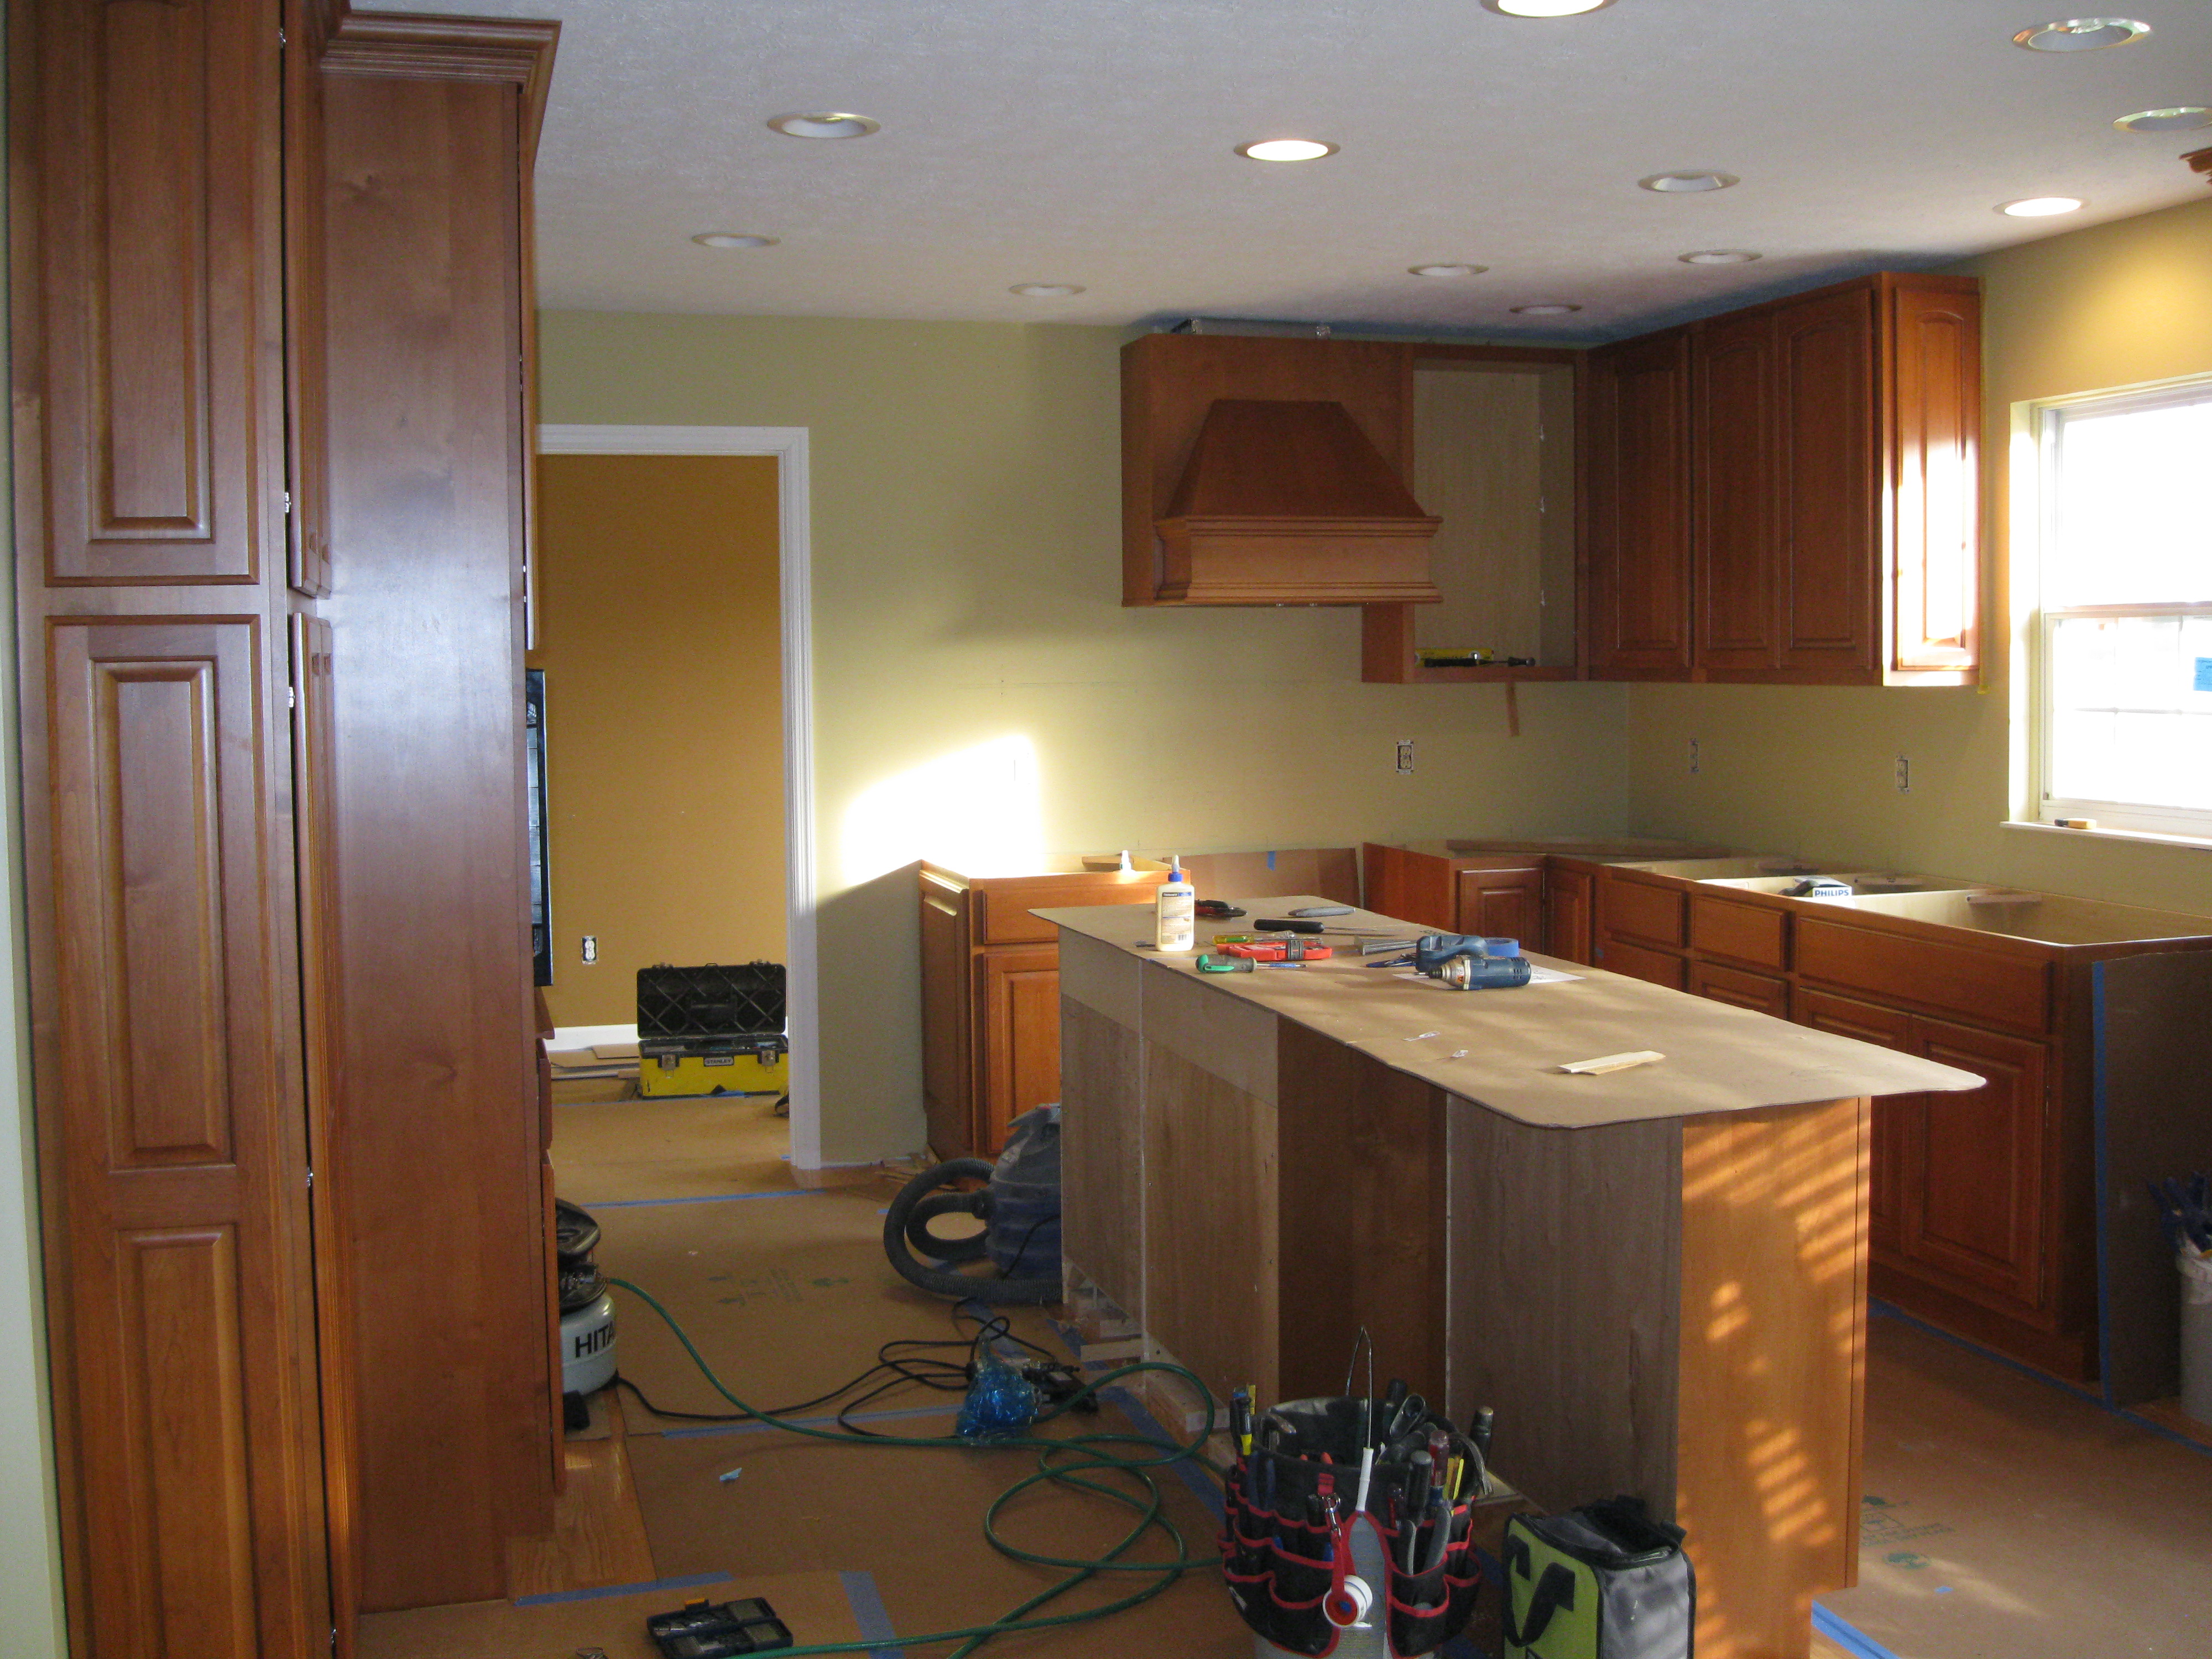 West Chester Kitchen Office Wall Cabinets Remodeling Designs Inc